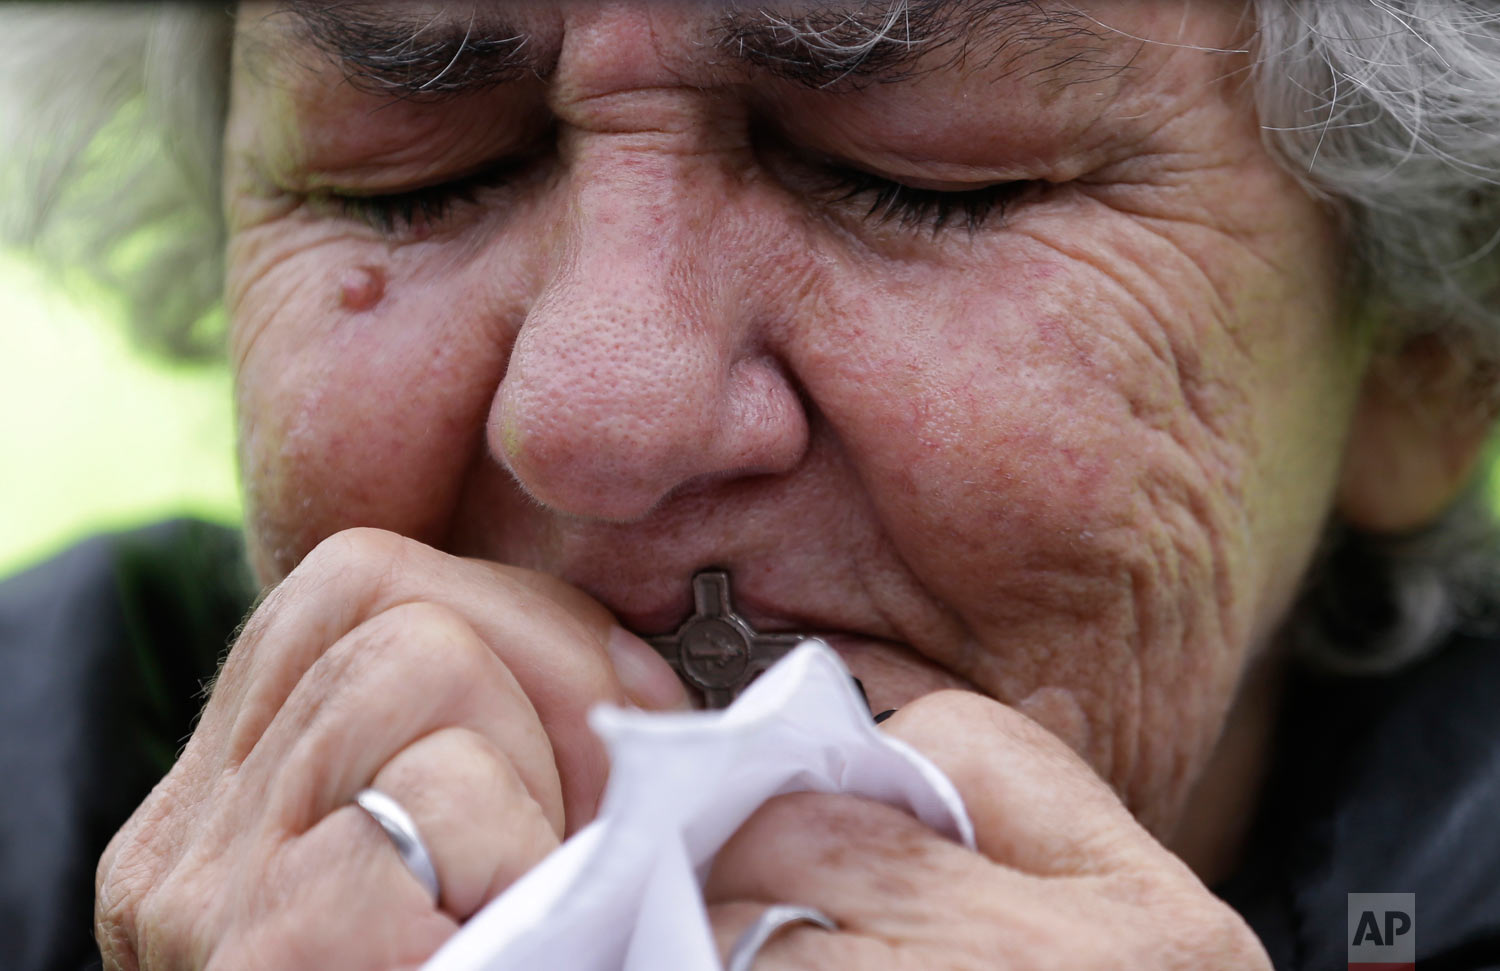  A woman kisses a cross during a rally to protest terrorism in Bogota, Colombia, Jan. 20, 2019. A car bombing at a Bogota police academy that authorities have attributed to rebels of the National Liberation Army killed 21 people and left dozens more 